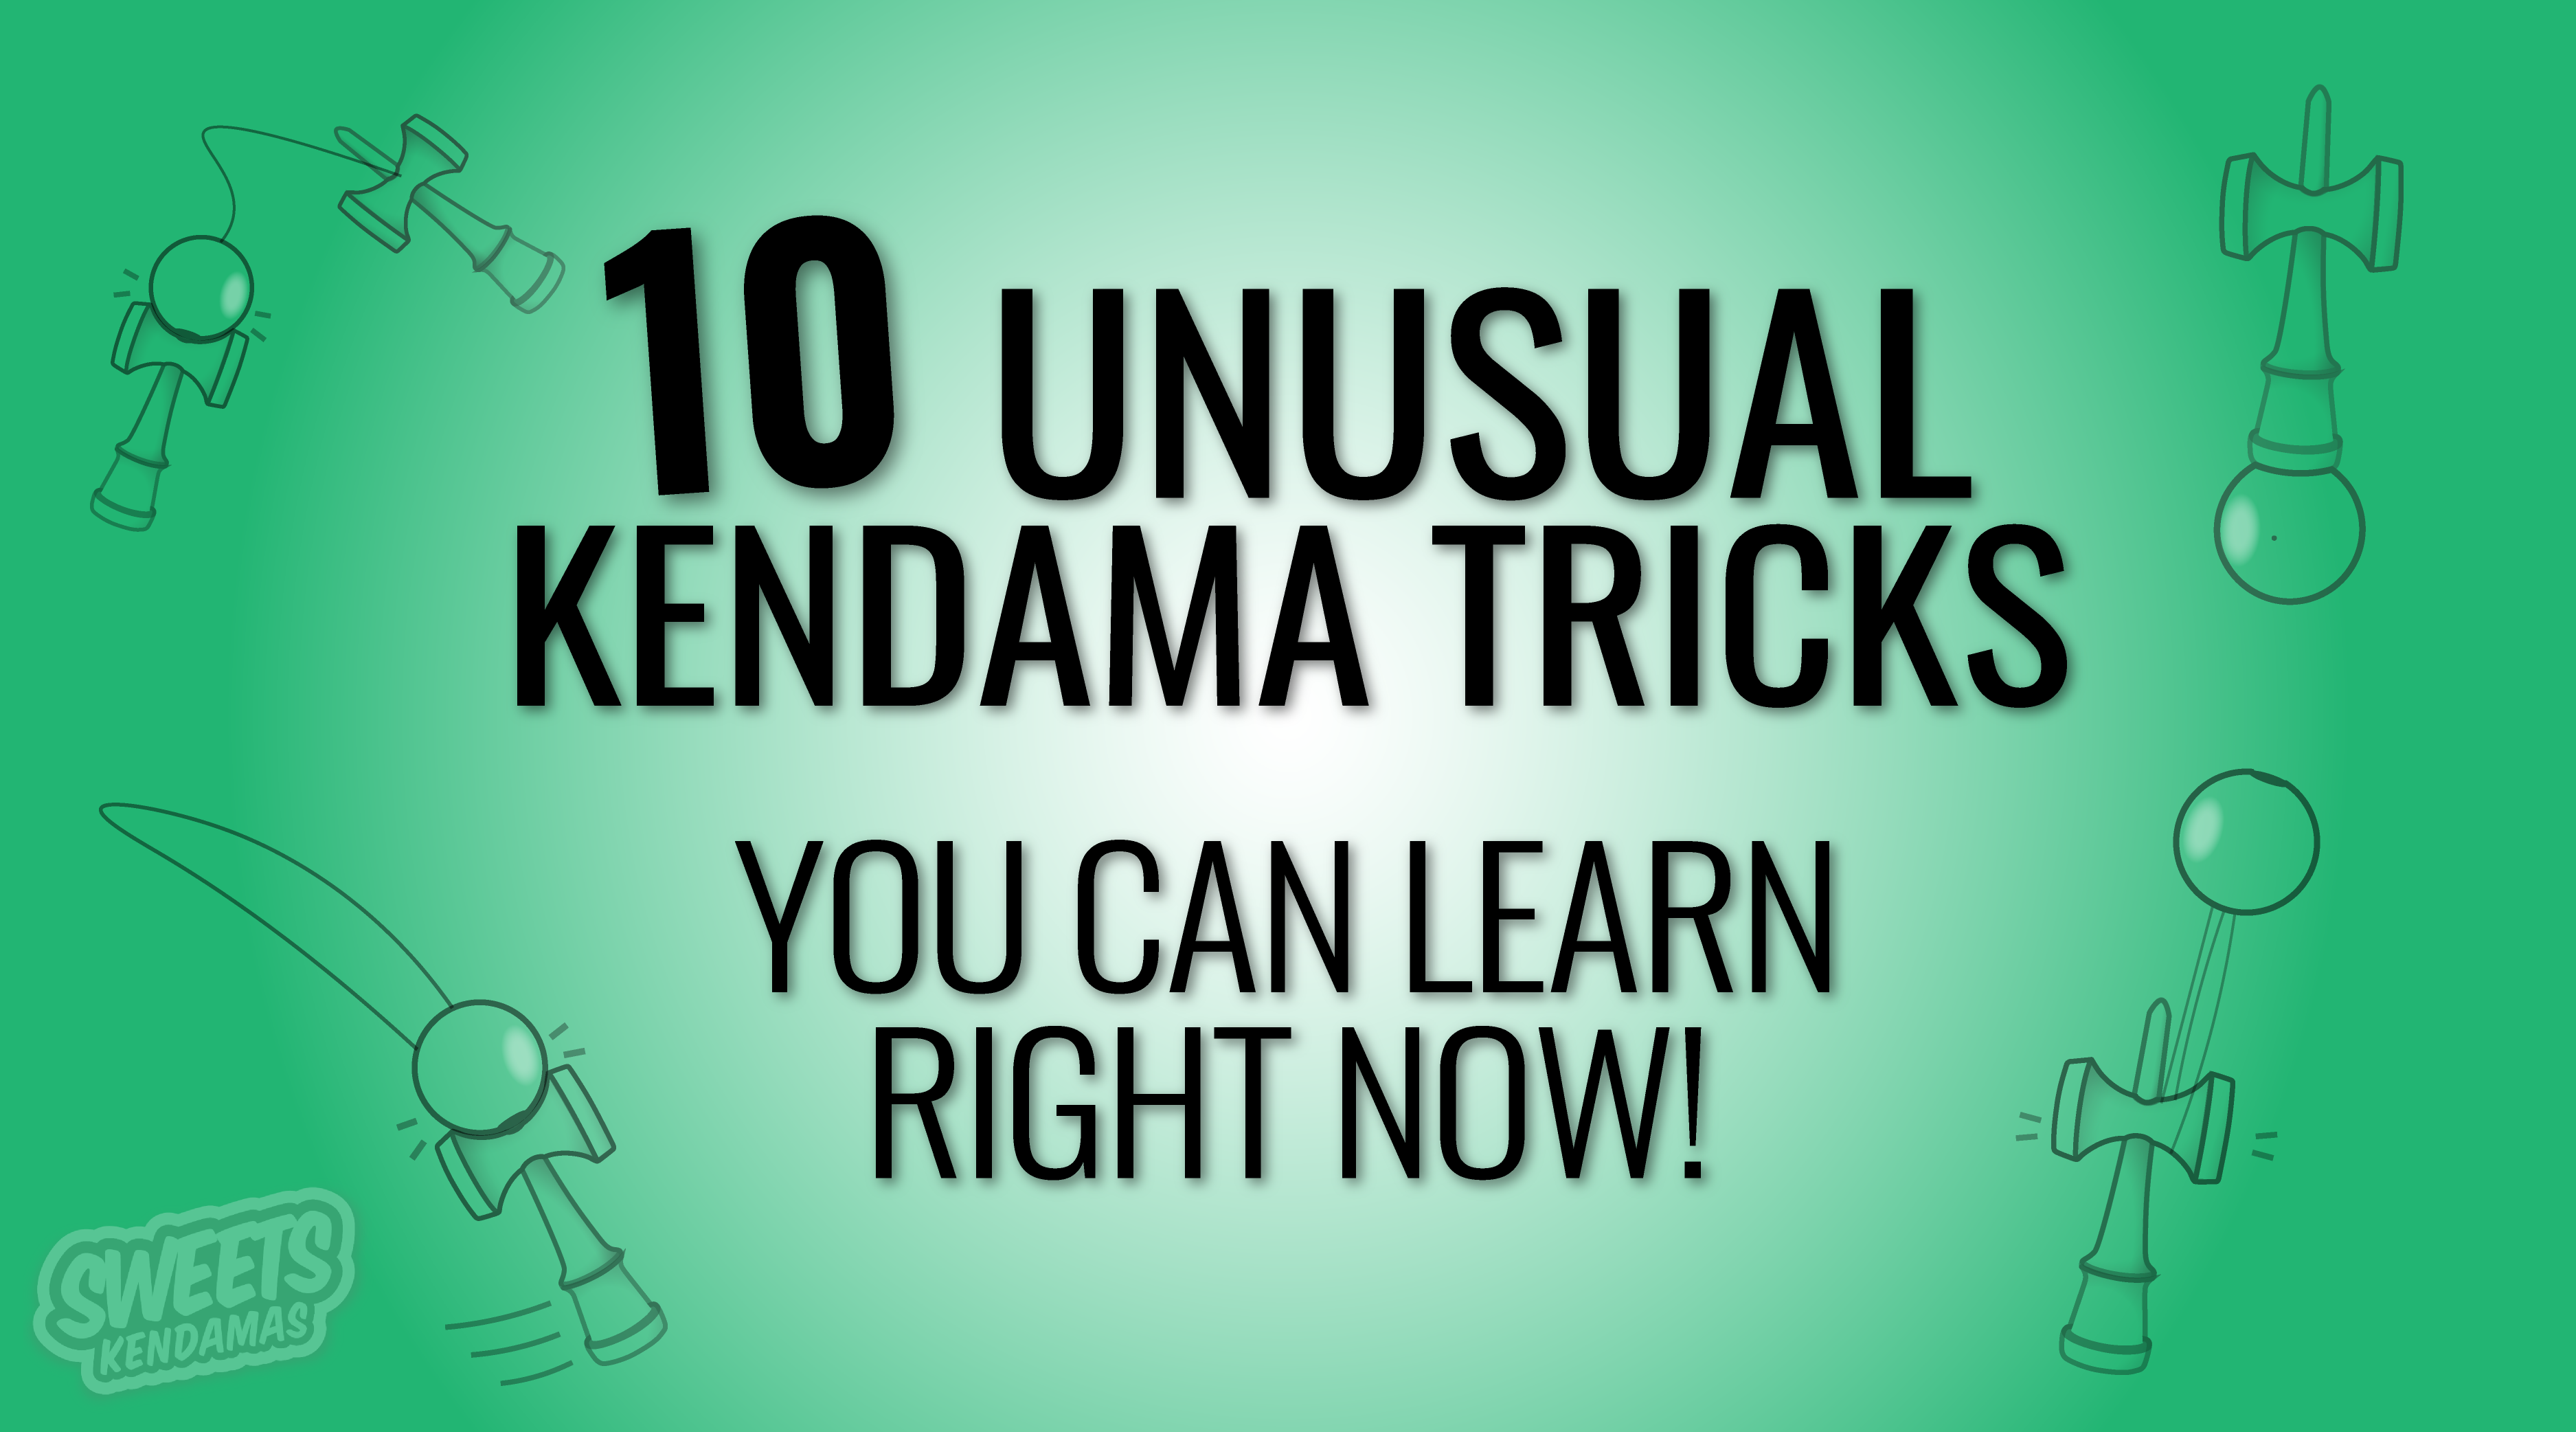 10 Unusual Kendama Tricks You Can Learn Right Now